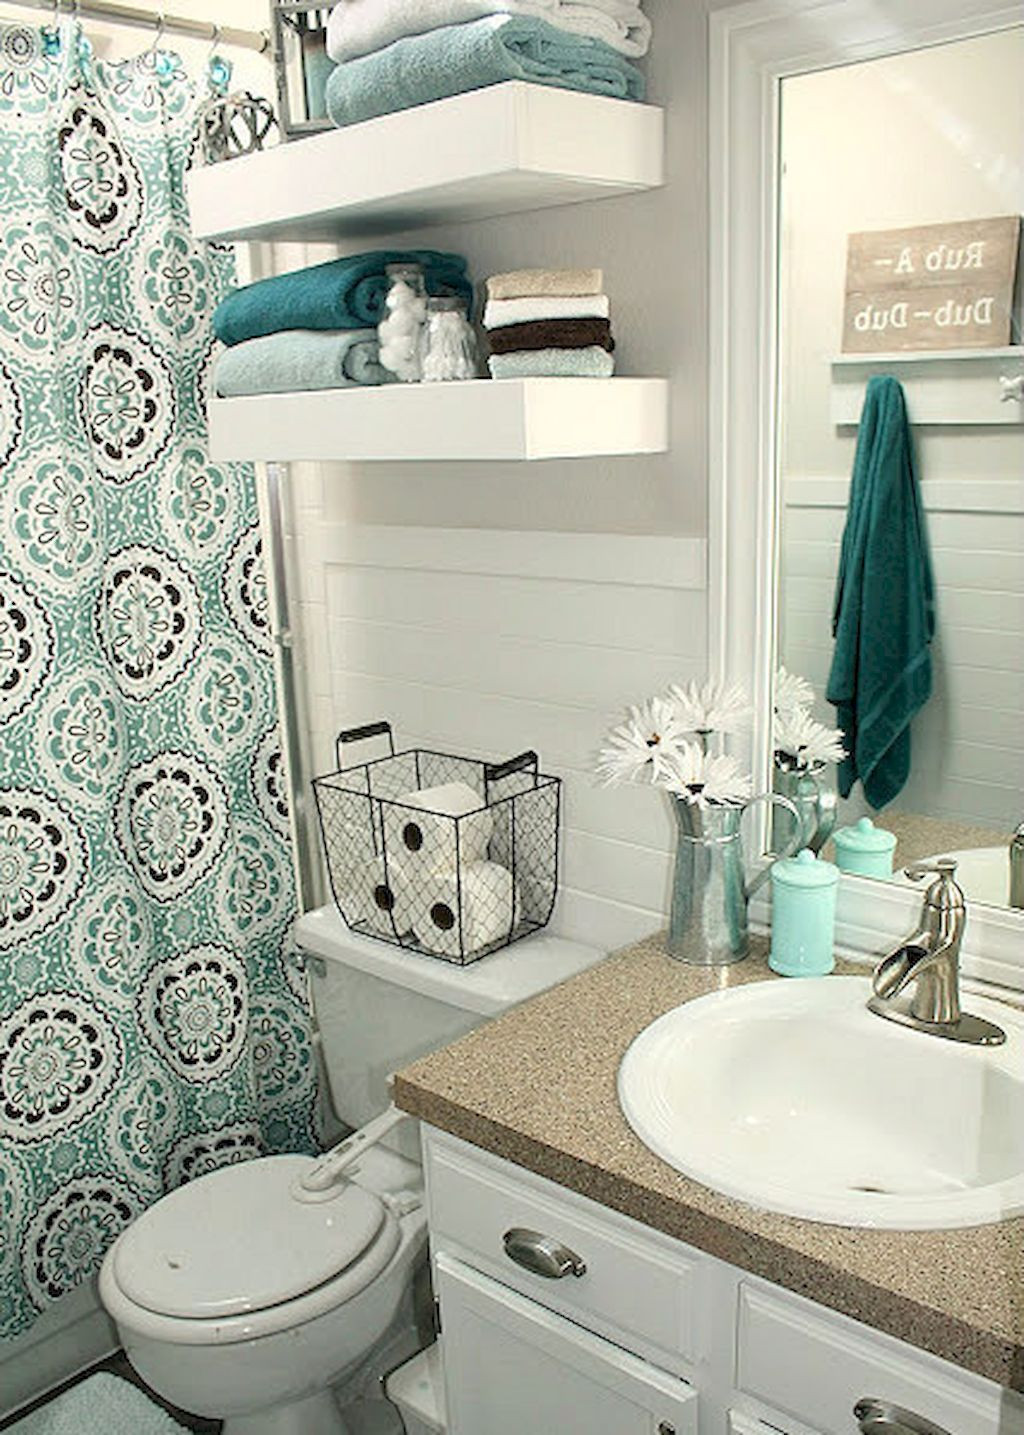 Small Bathroom Decorations
 Pin by Jennifer Tinsley on Happy homes